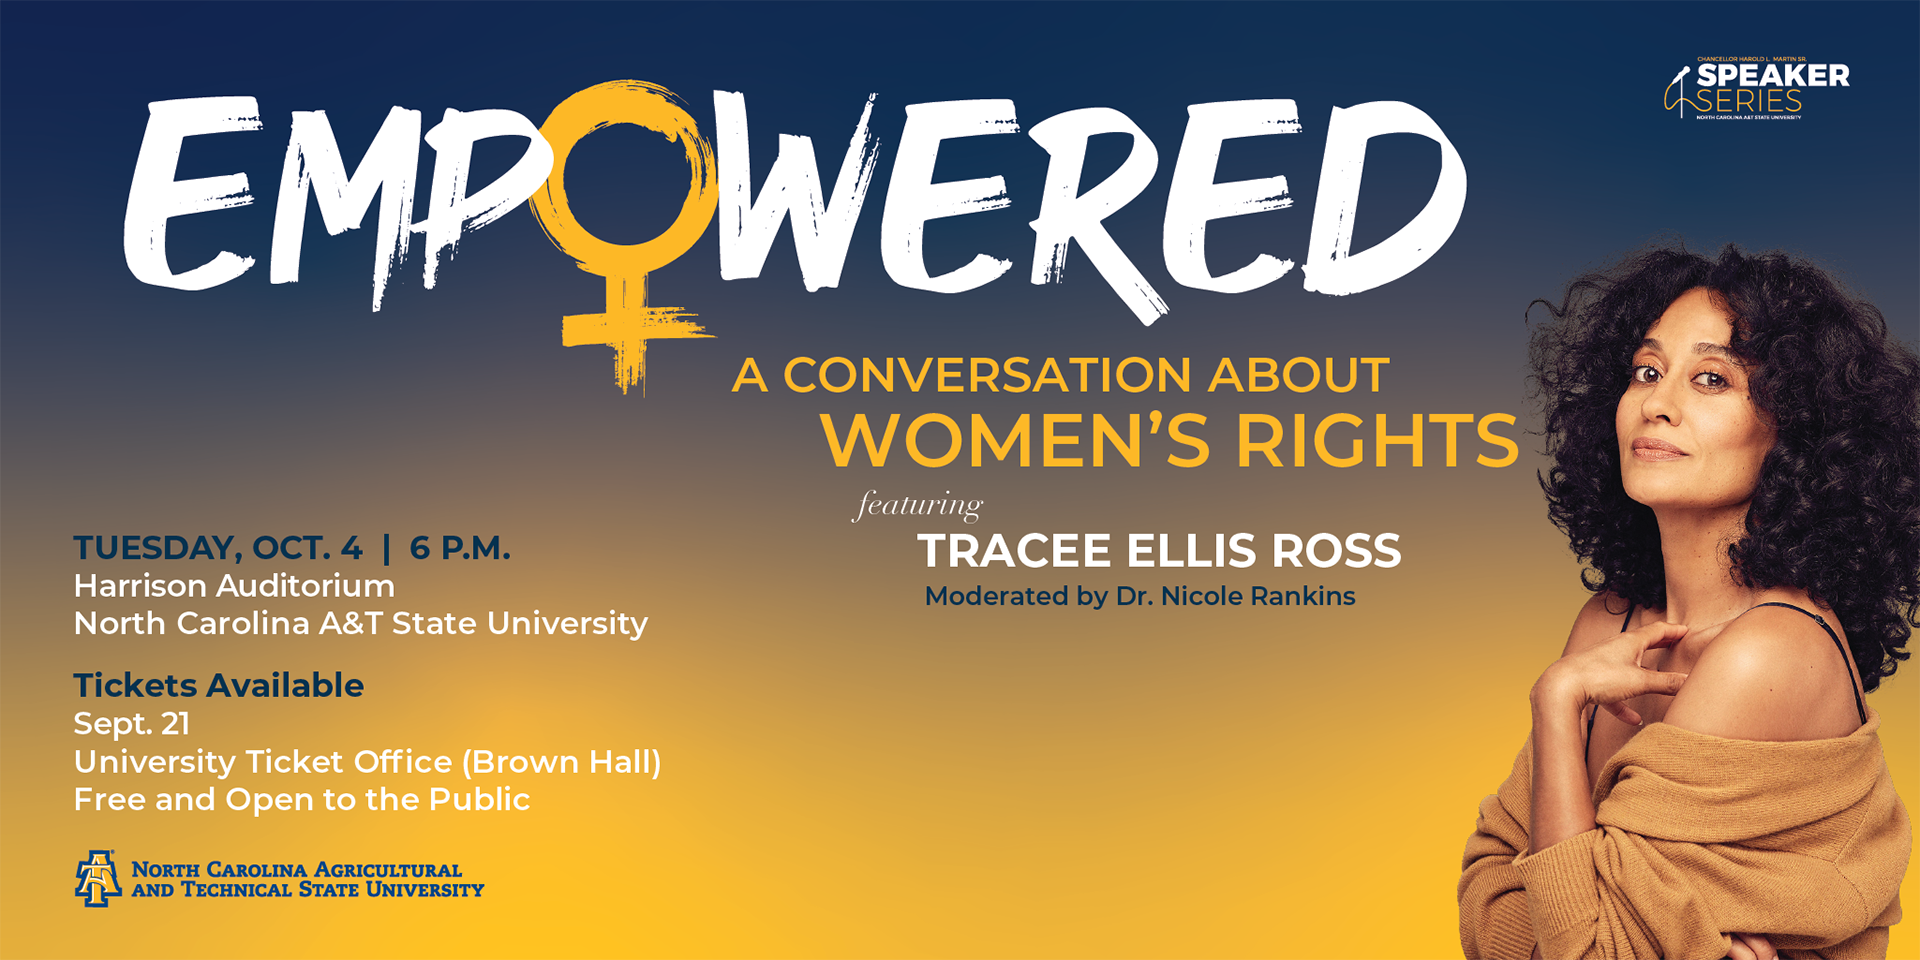 Chancellor's Speakers Series Empowered featuring Tracey Ellis Ross, October 4th 2022 6 p.m.